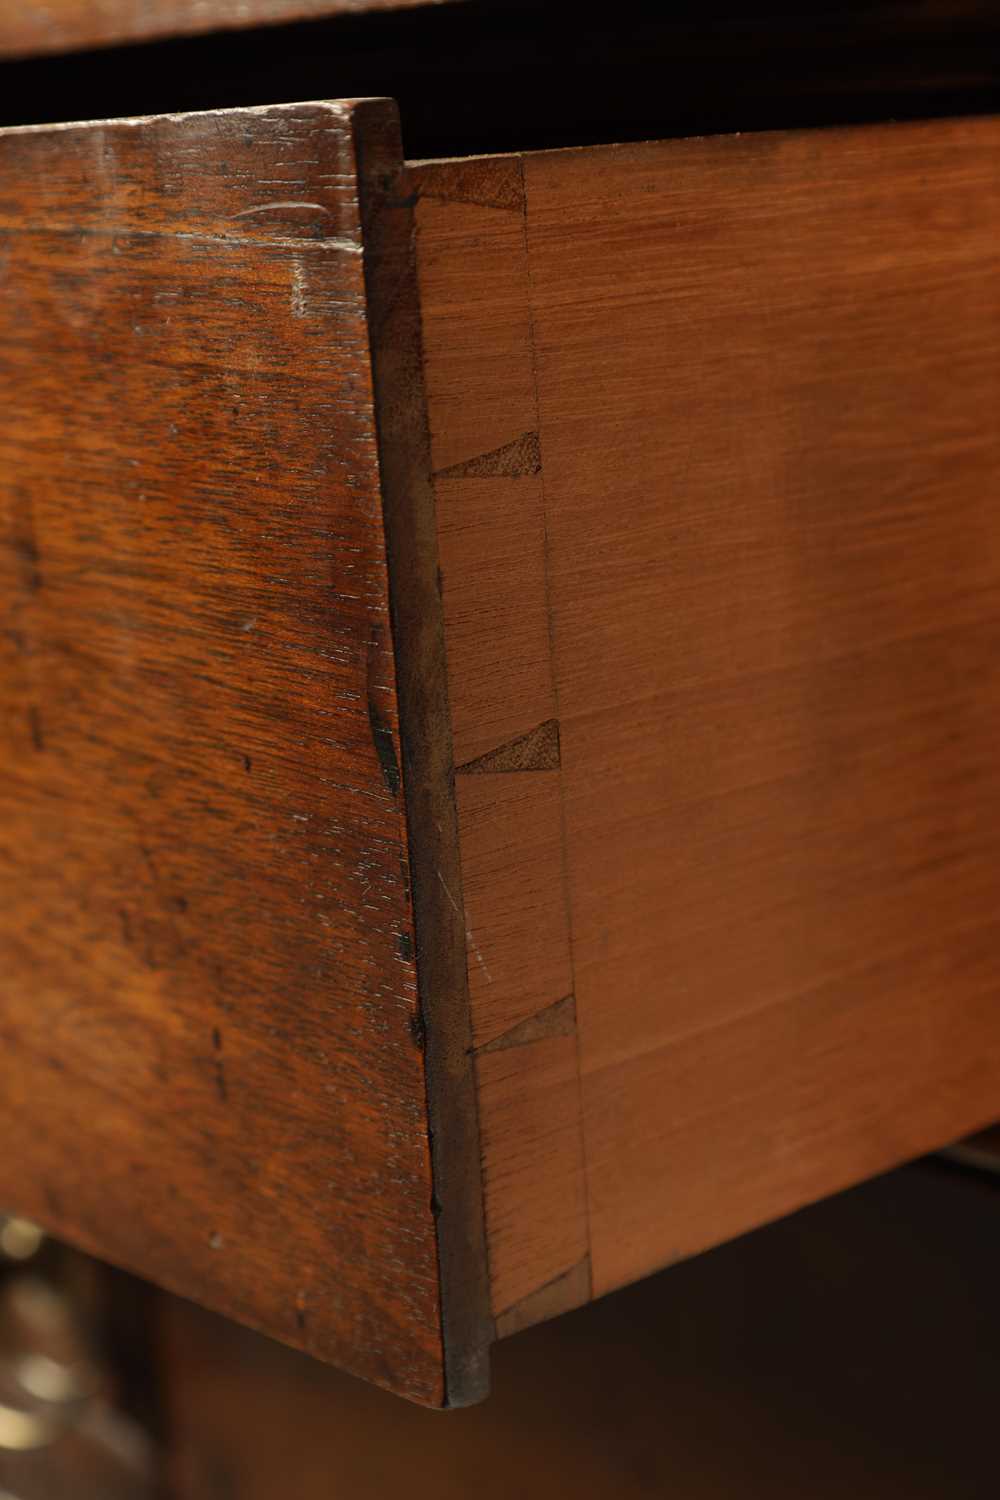 AN UNUSUAL LATE 19TH CENTURY WALNUT SMALL CHEST OF DRAWERS BY E. WALKER CABINETMAKER AND DATED 1893 - Image 7 of 7